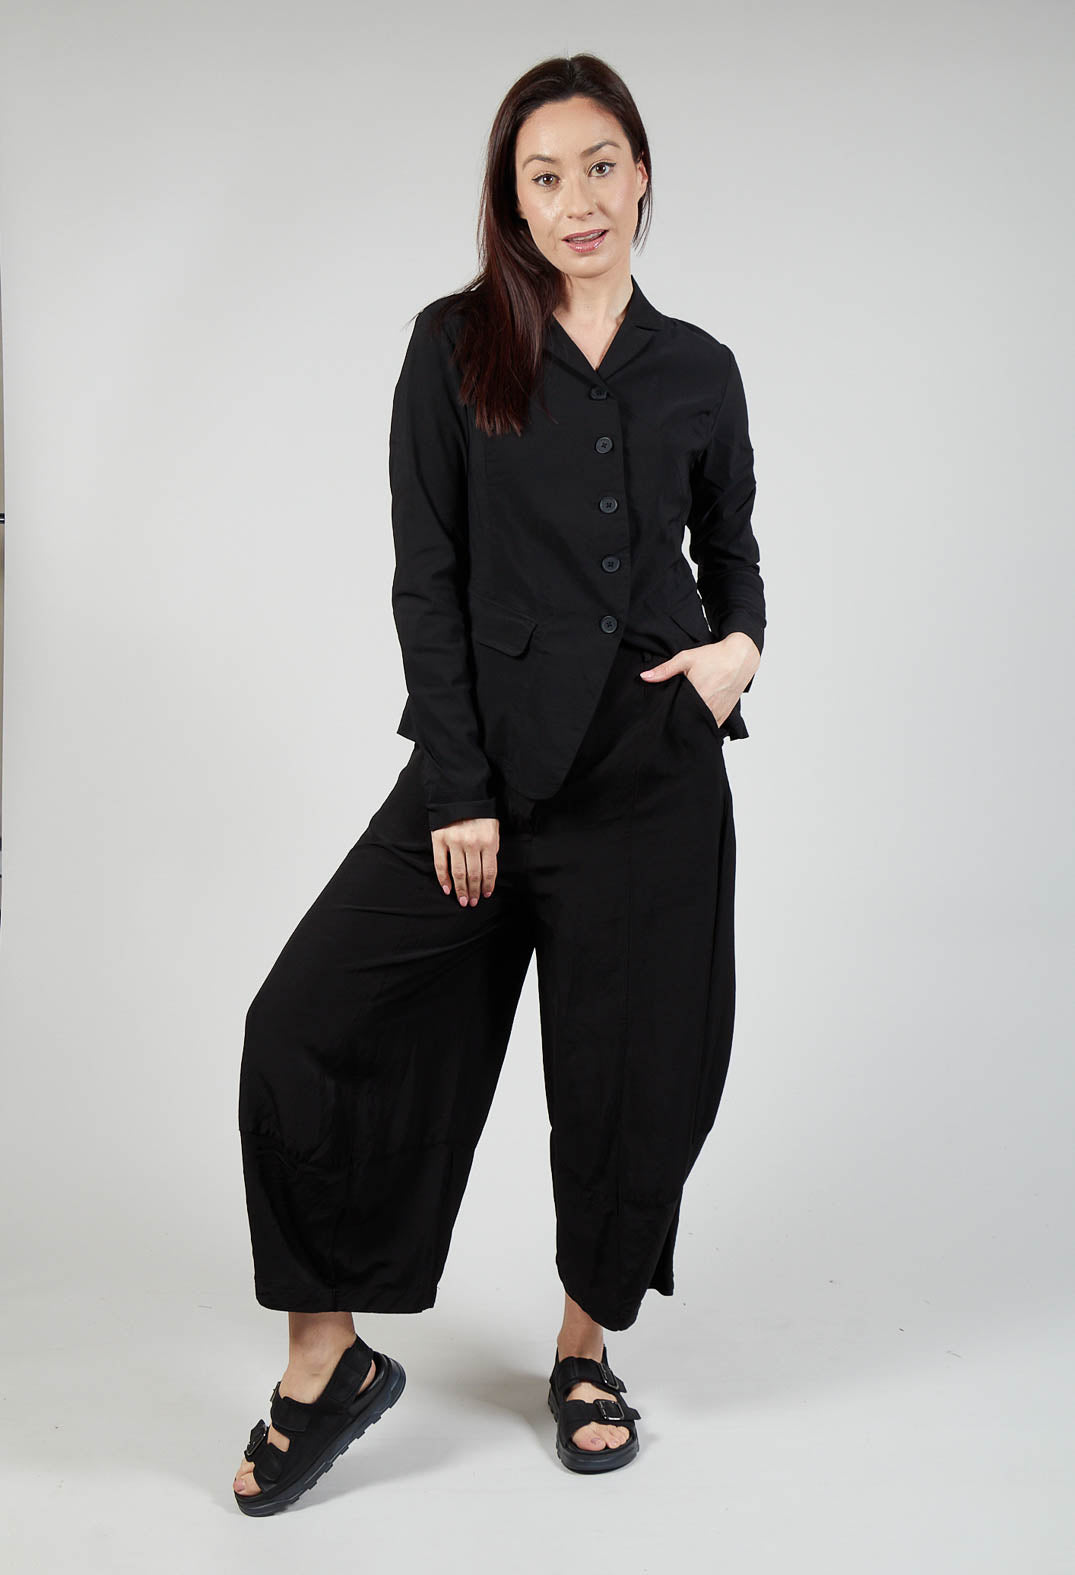 Relaxed Fit Balloon Trousers in Black